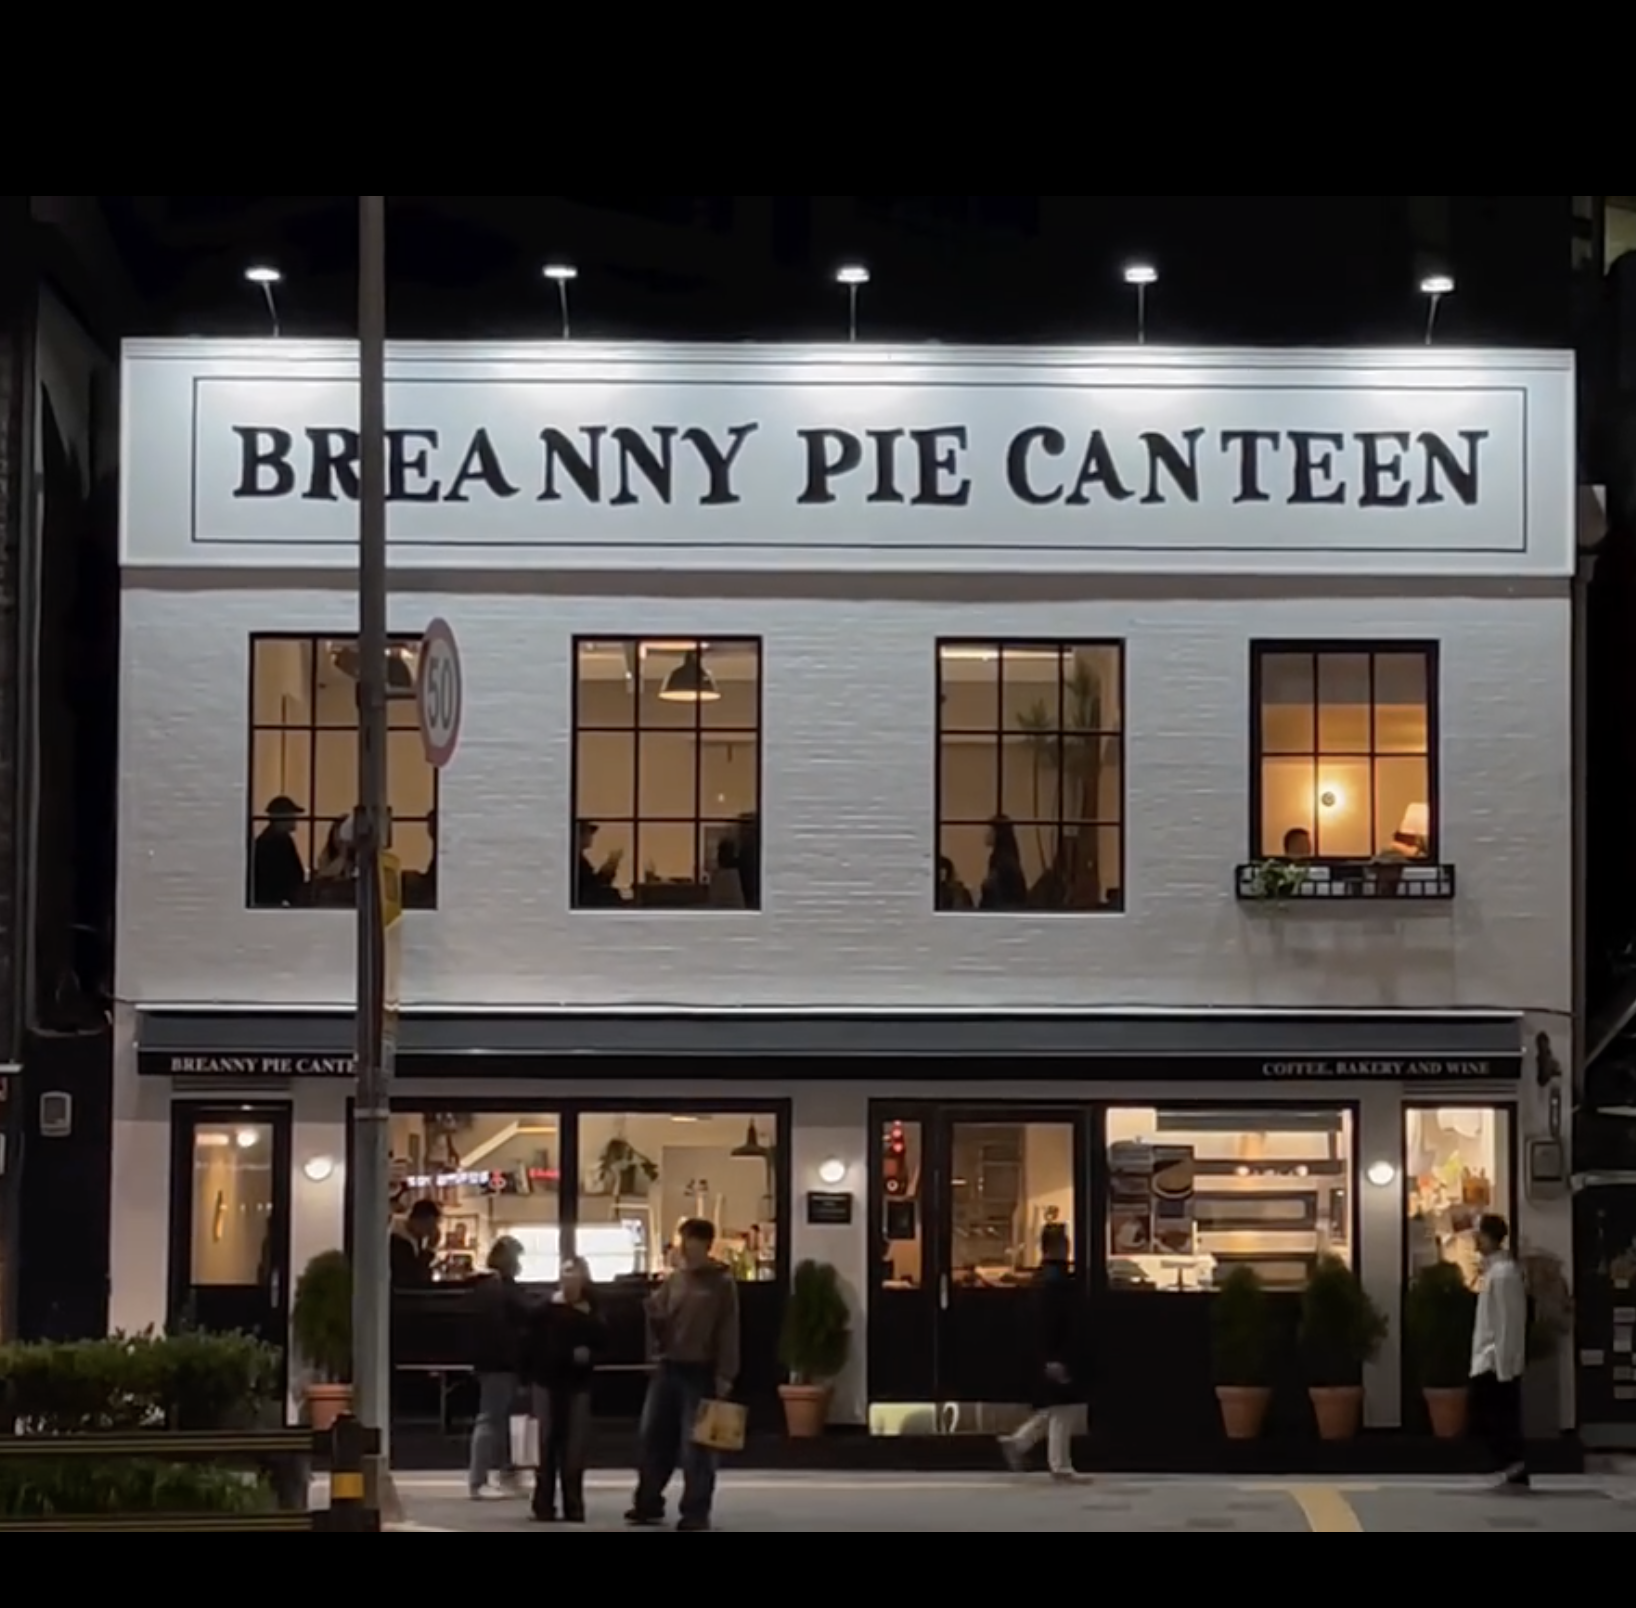 Breanny Pie Canteen (브레니파이칸틴): A Slice of Europe in the Heart of Seoul, Featuring Unique Meat and Dessert Pies